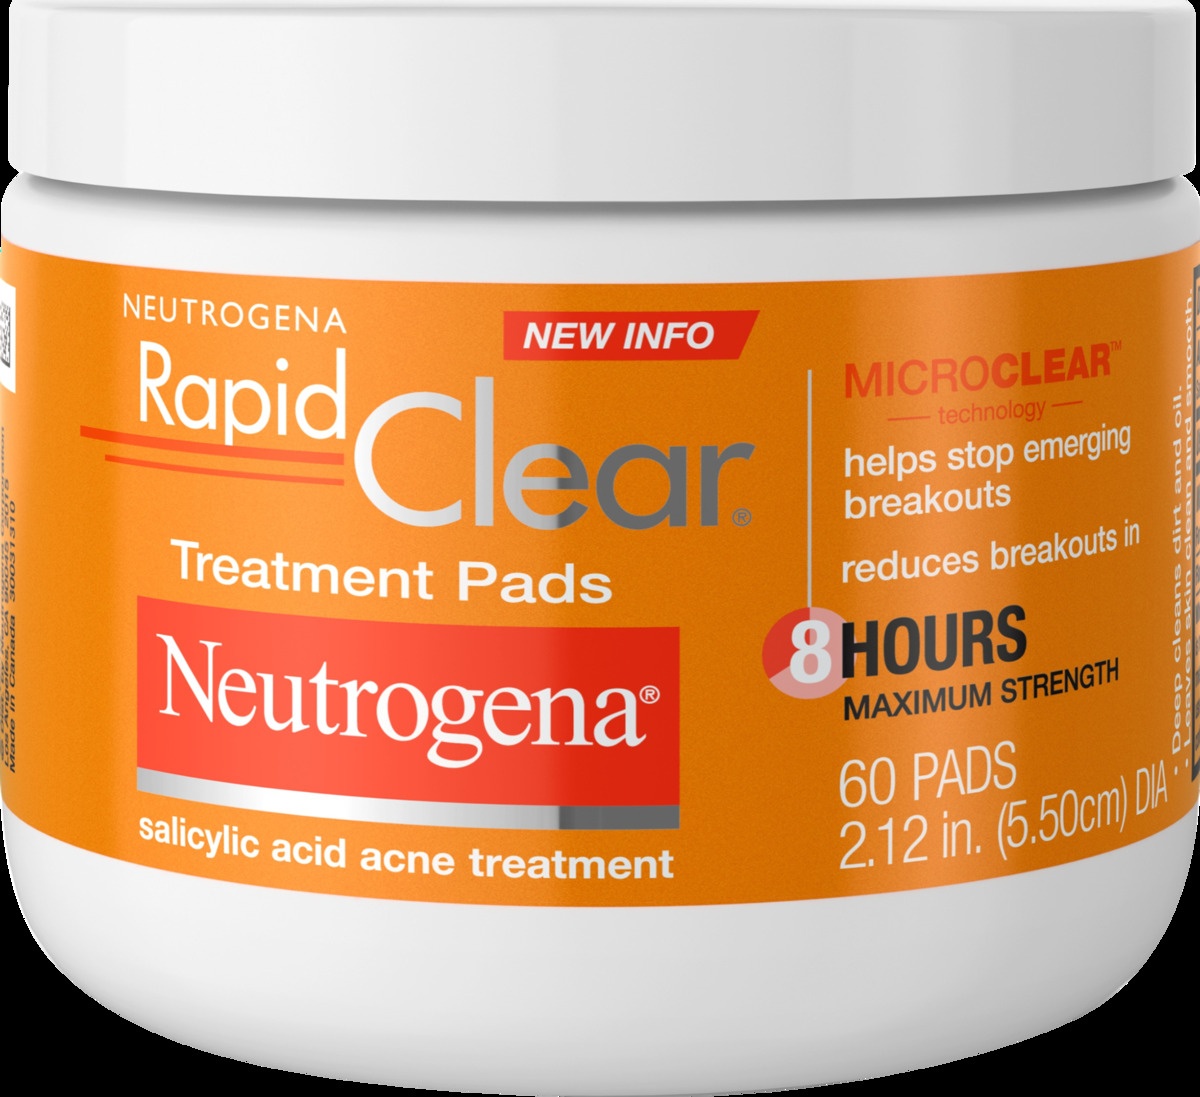 slide 4 of 5, Neutrogena Rapid Clear Maximum Strength Acne Face Pads with 2% Salicylic Acid Acne Treatment Medication to Help Fight Breakouts, Oil-Free Facial Cleansing Pads for Acne-Prone Skin, 60 ct